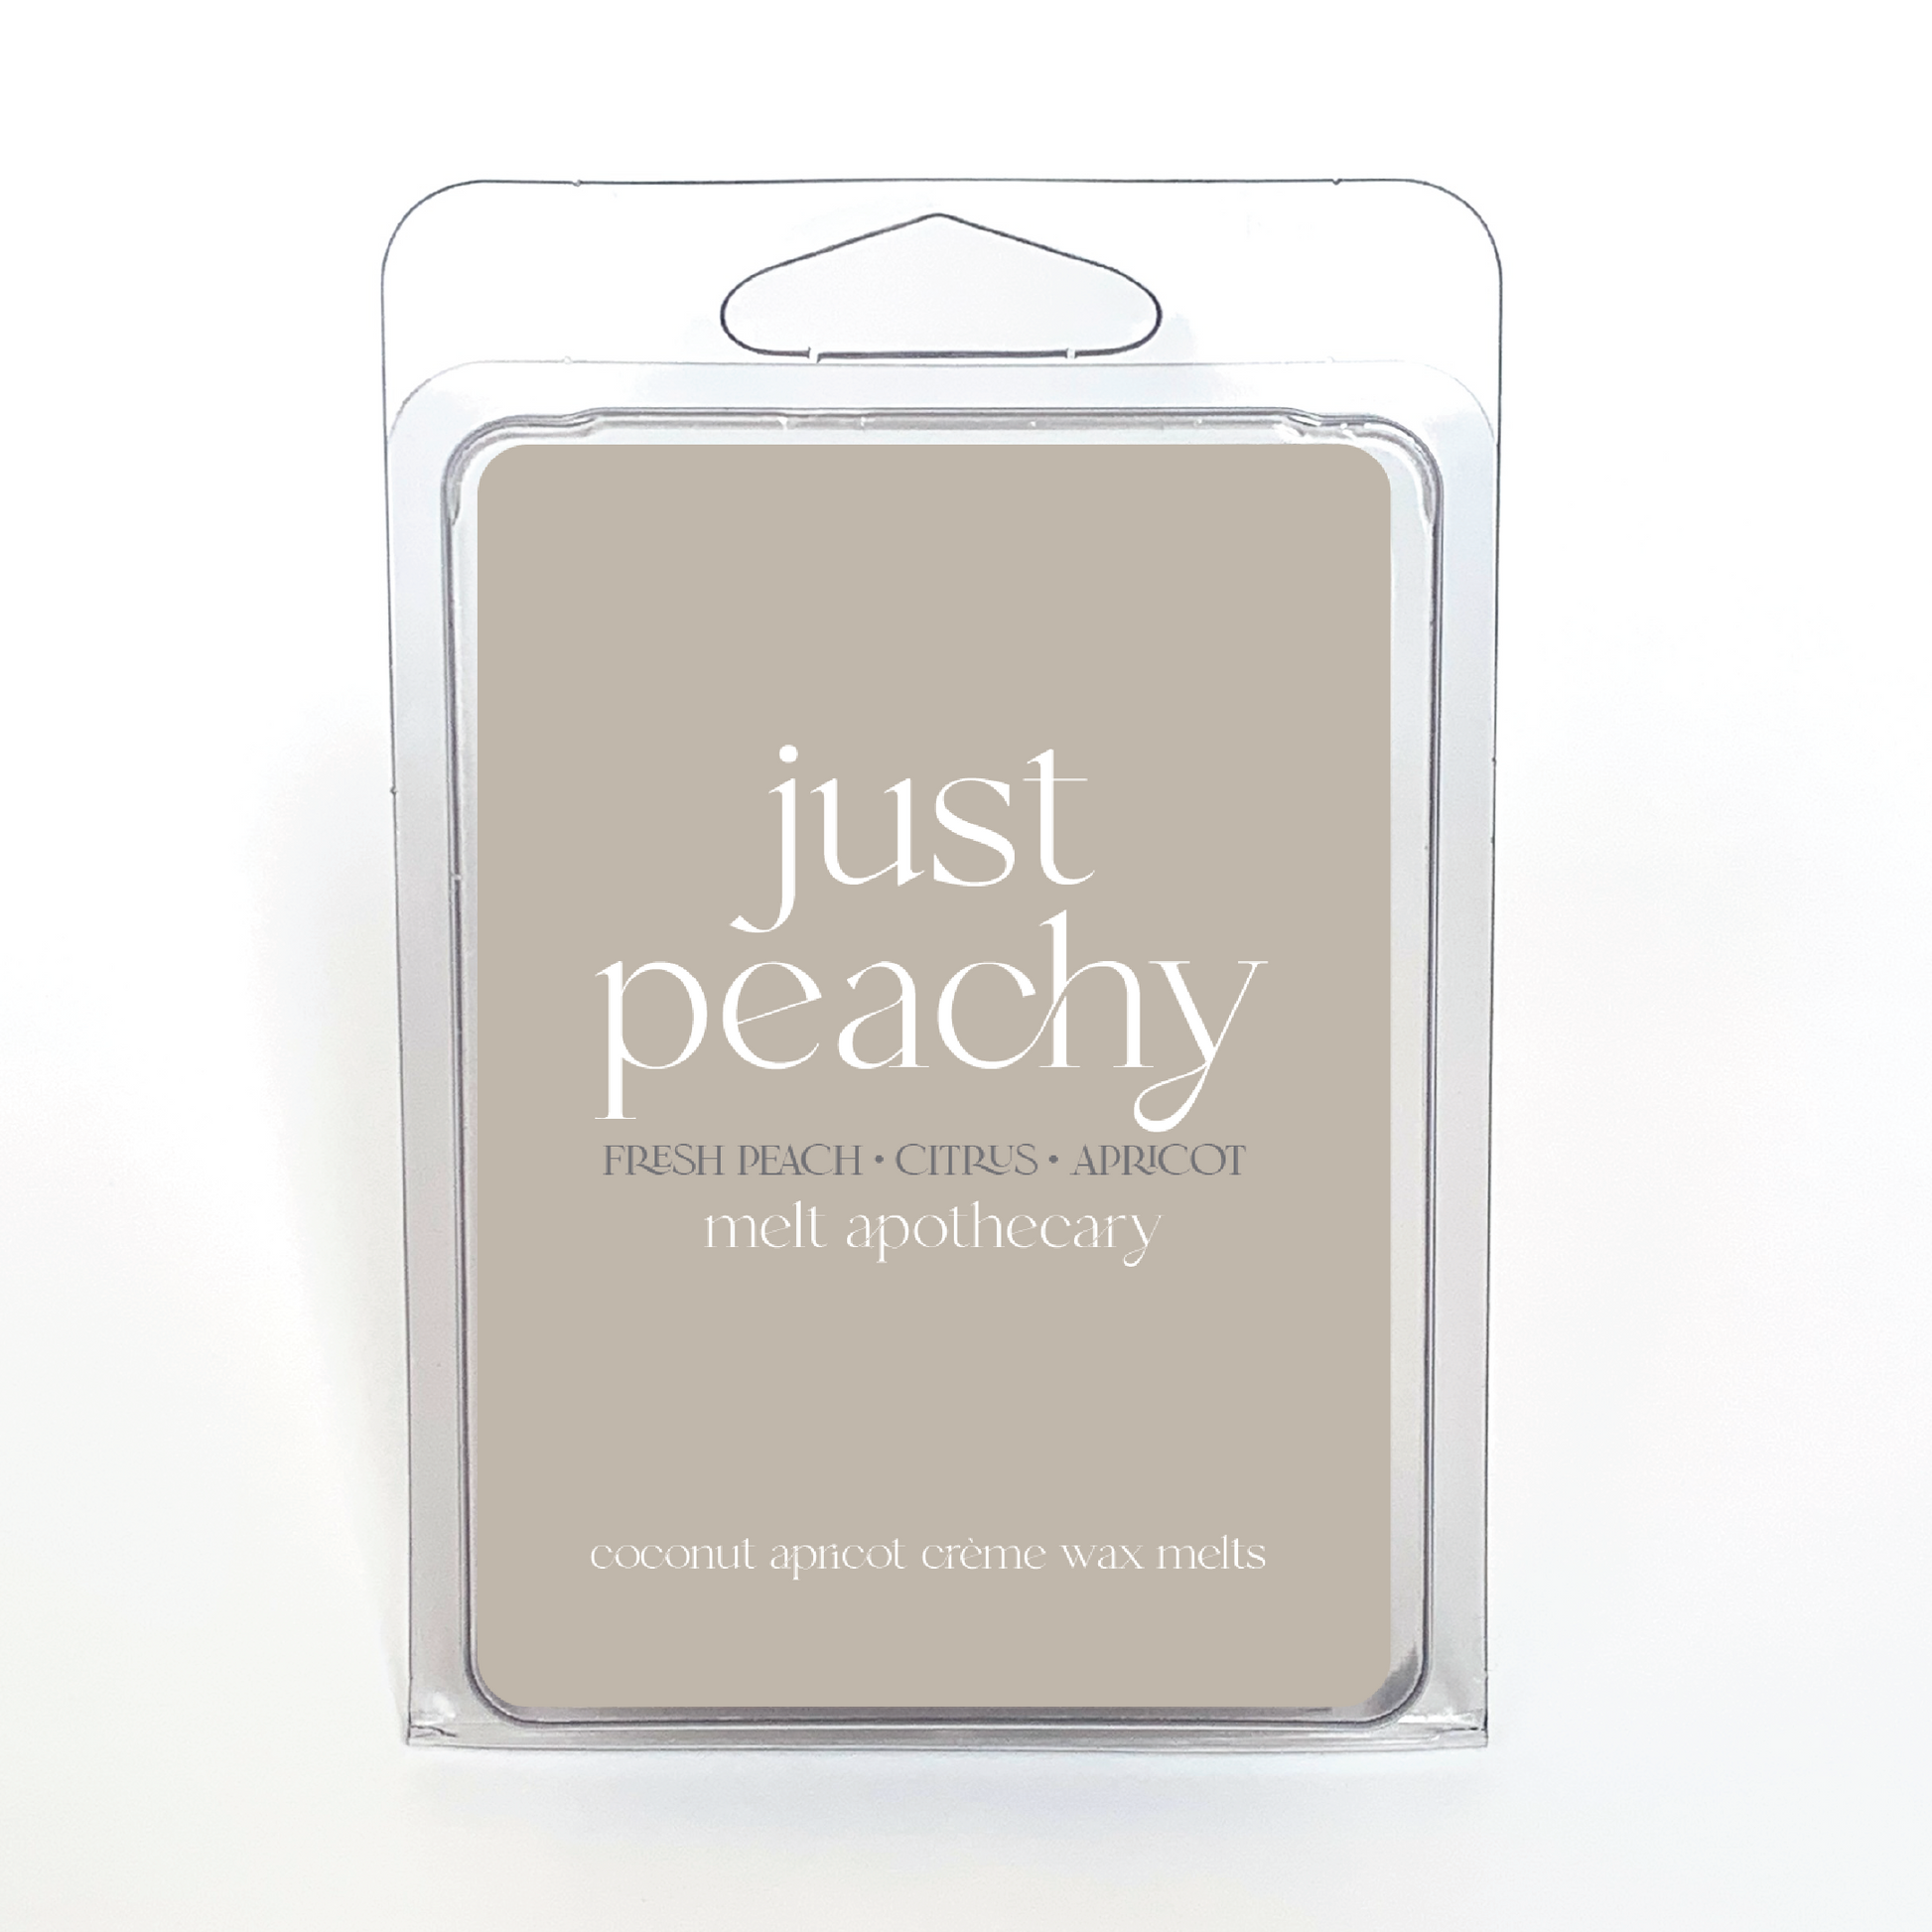 Just peachy wax melt made with fresh peach, citrus and apricot. Coconut apricot crème wax